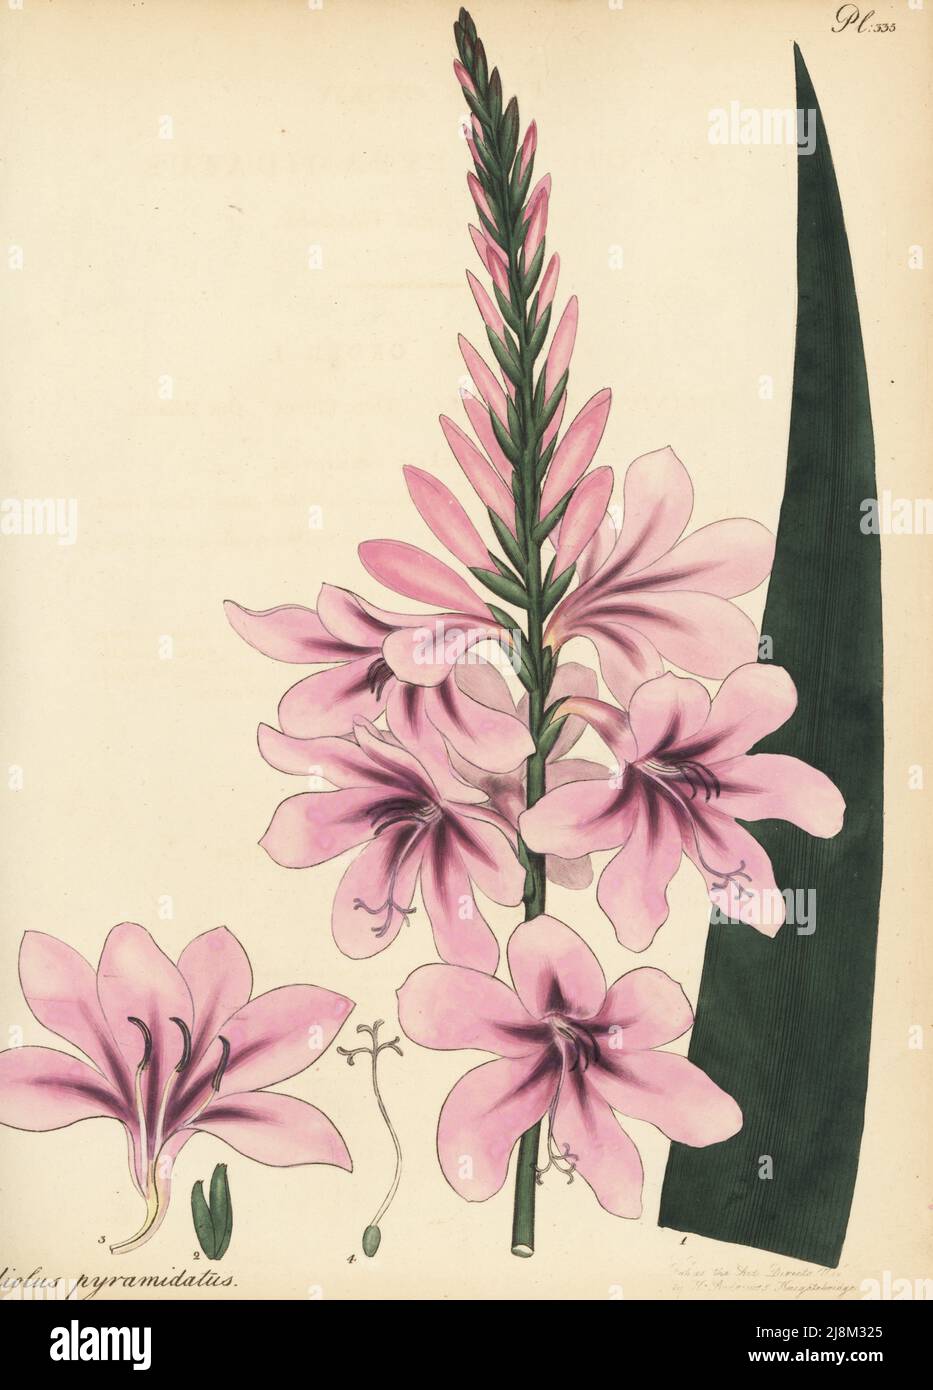 Cape bugle-lily, Watsonia borbonica subsp. borbonica. Pyramidal-spiked gladiolus, Gladiolus pyramidatus. From the Cape of Good Hope, South Africa, in the collection of Sophia Campbell, Dowager Lady de Clifford, Paddington. Copperplate engraving drawn, engraved and hand-coloured by Henry Andrews from his Botanical Register, Volume 5, self-published in Knightsbridge, London, 1803. Stock Photo